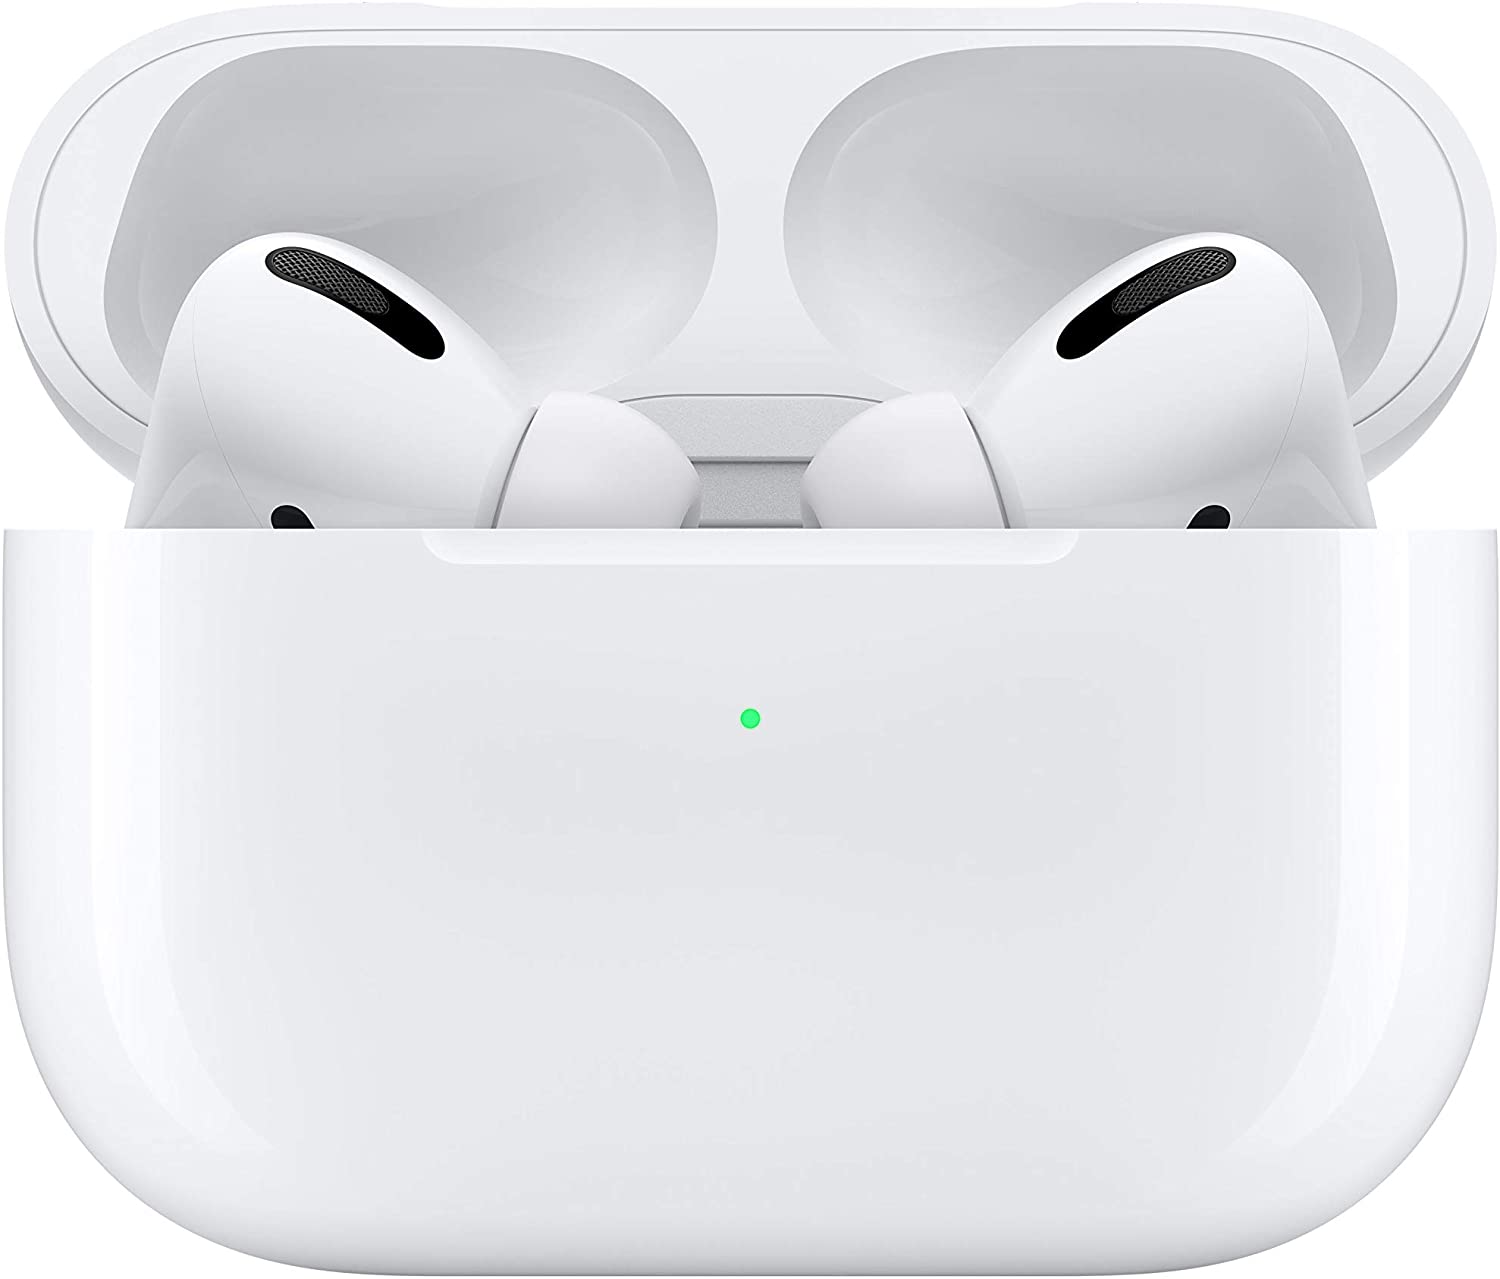 Airpods Pro - 173.50 加元（仓库交易 - 二手 - 质量好）